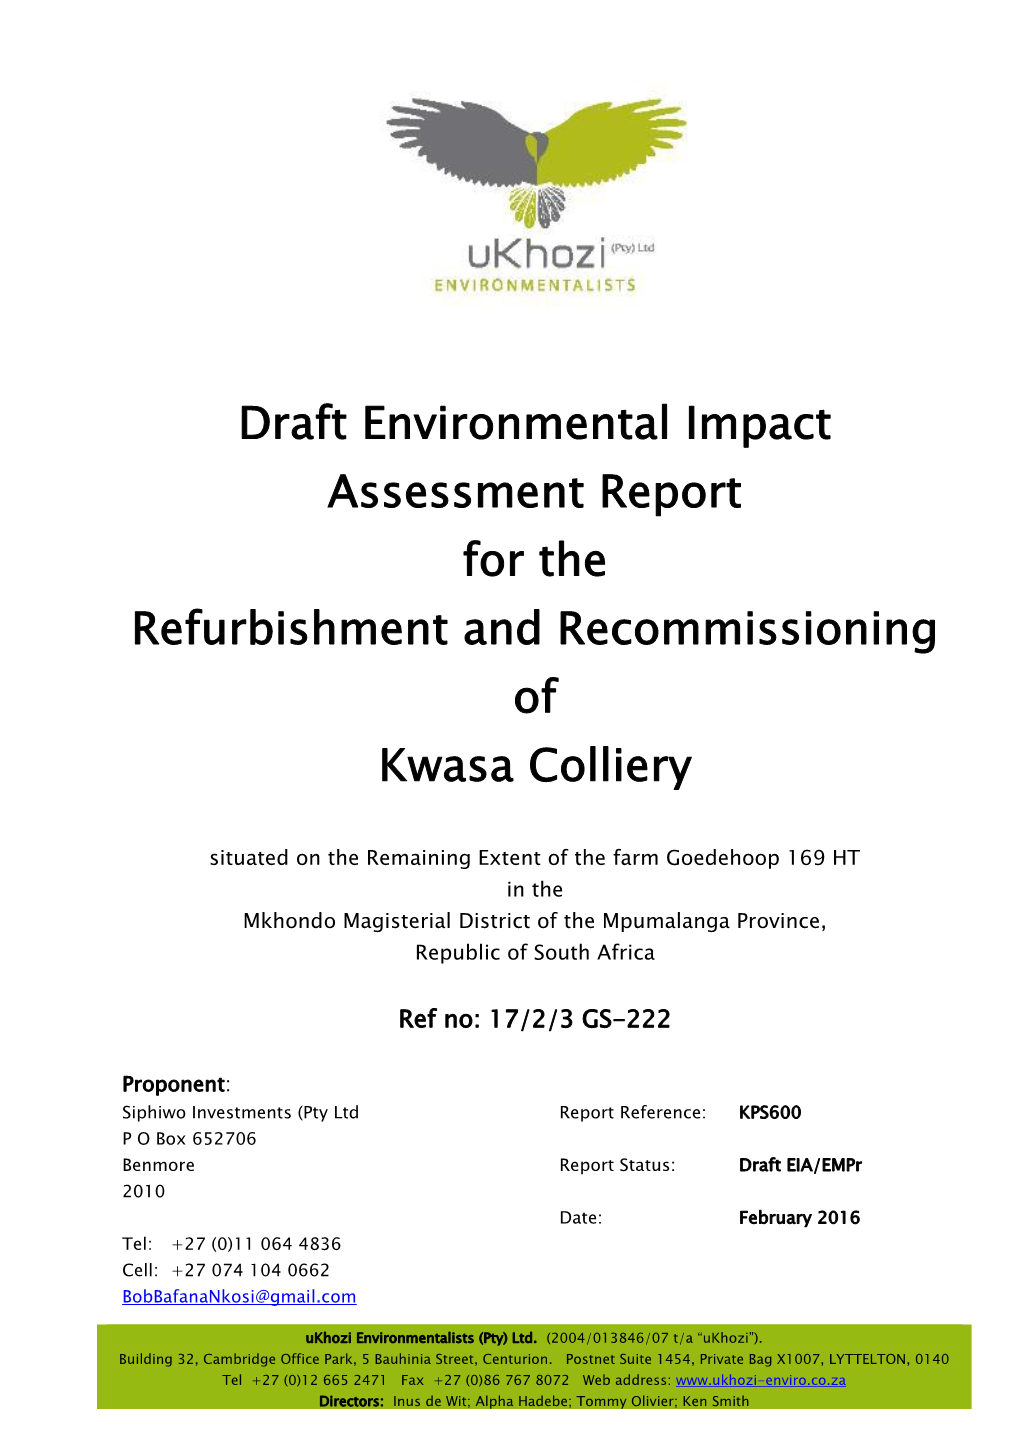 Draft Environmental Impact Assessment Report for the Refurbishment and Recommissioning of Kwasa Colliery